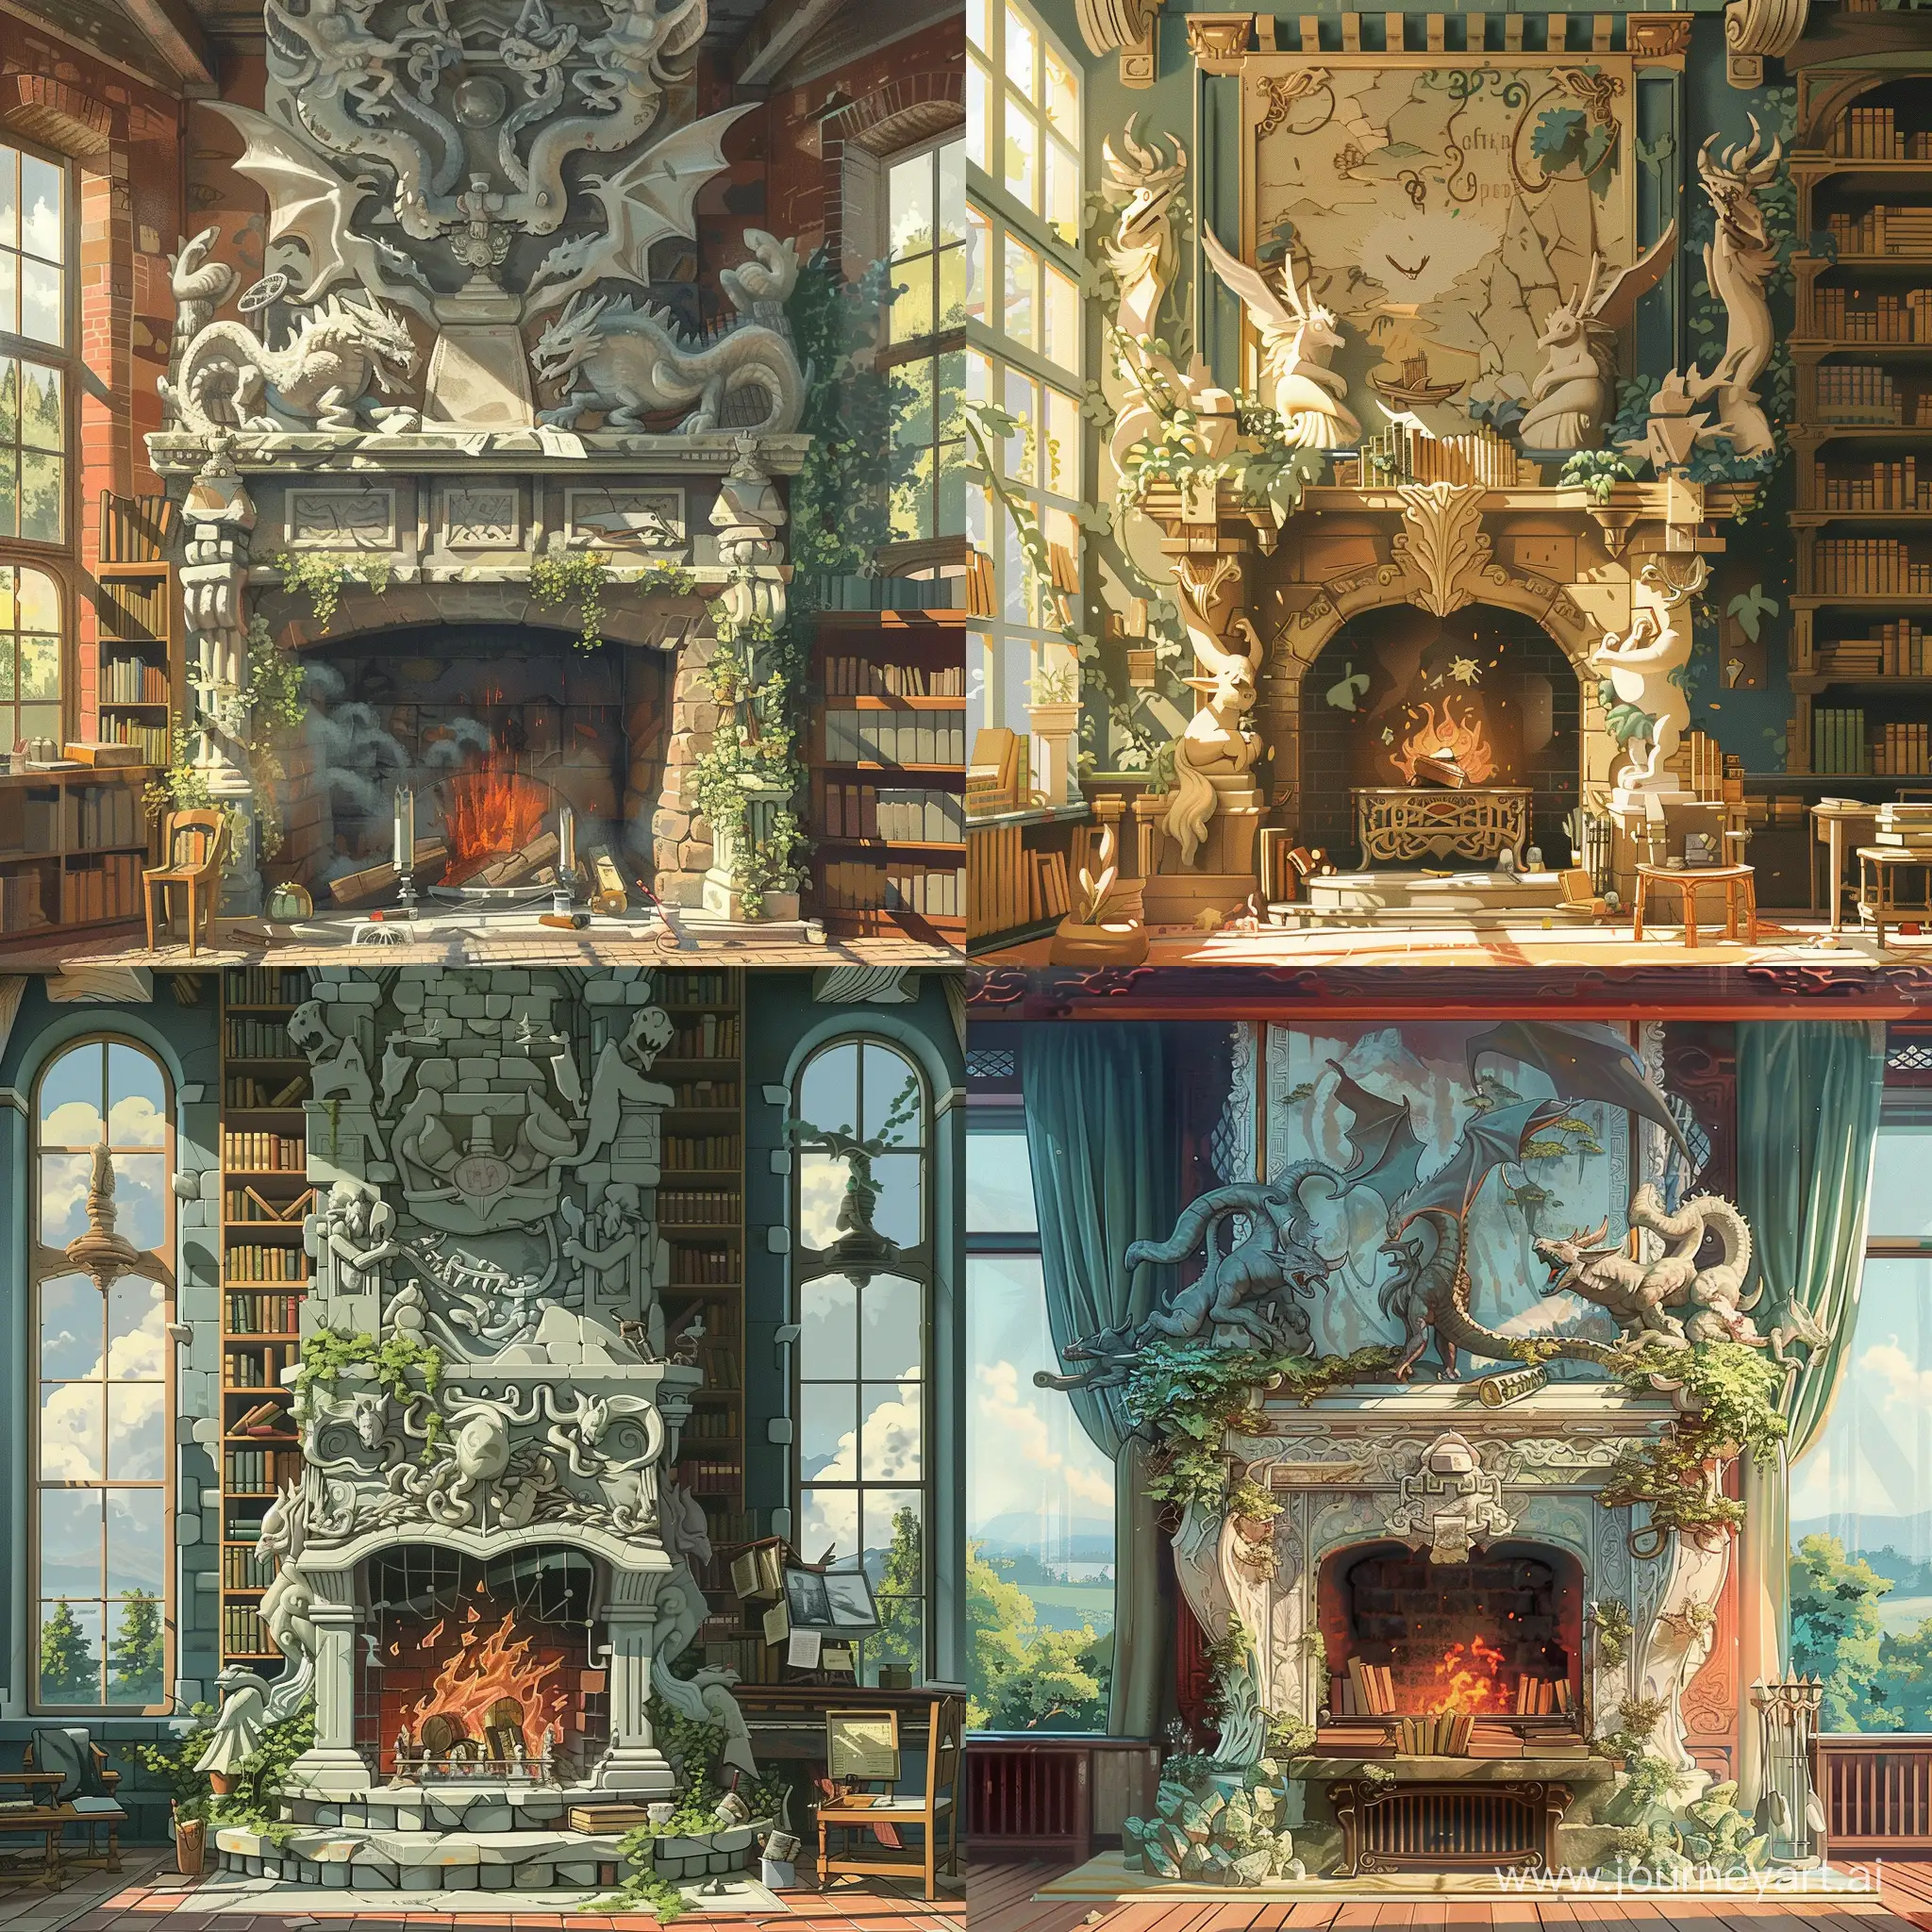 Huge fireplace decorated with scultures and reliefs of orcs and dragons, wizard's study room, fantasy, magic, a beautiful day outside by Otake Chikuha, breathtaking illustrated, simple, featured on pixiv, muted colors with minimalism, irina nordsol kuzmina, a hazy memory,  style expressive